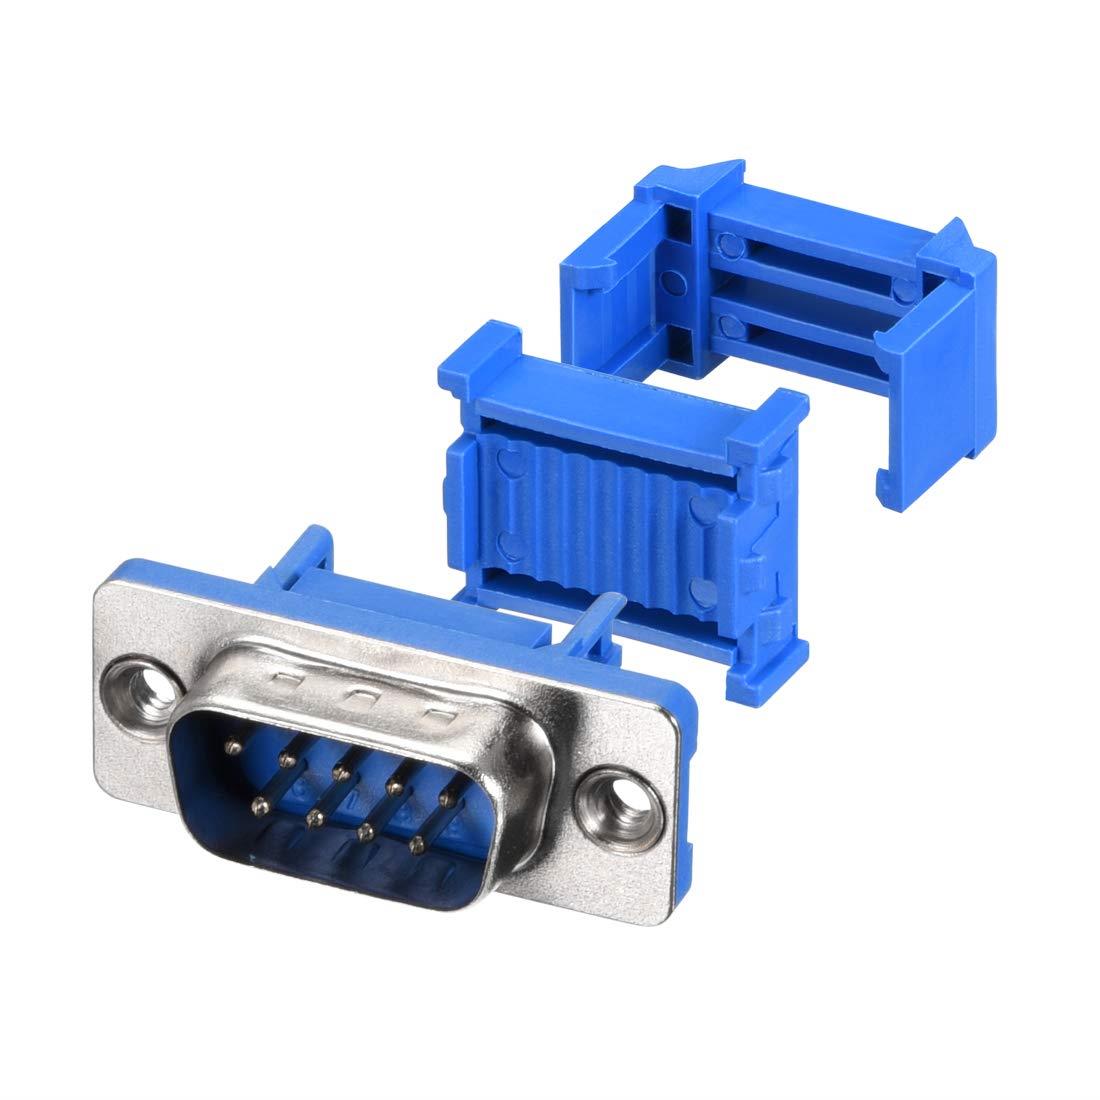 DB9 Male IDC Type Crimp Connector for Flat Cable [2pcs Pack]